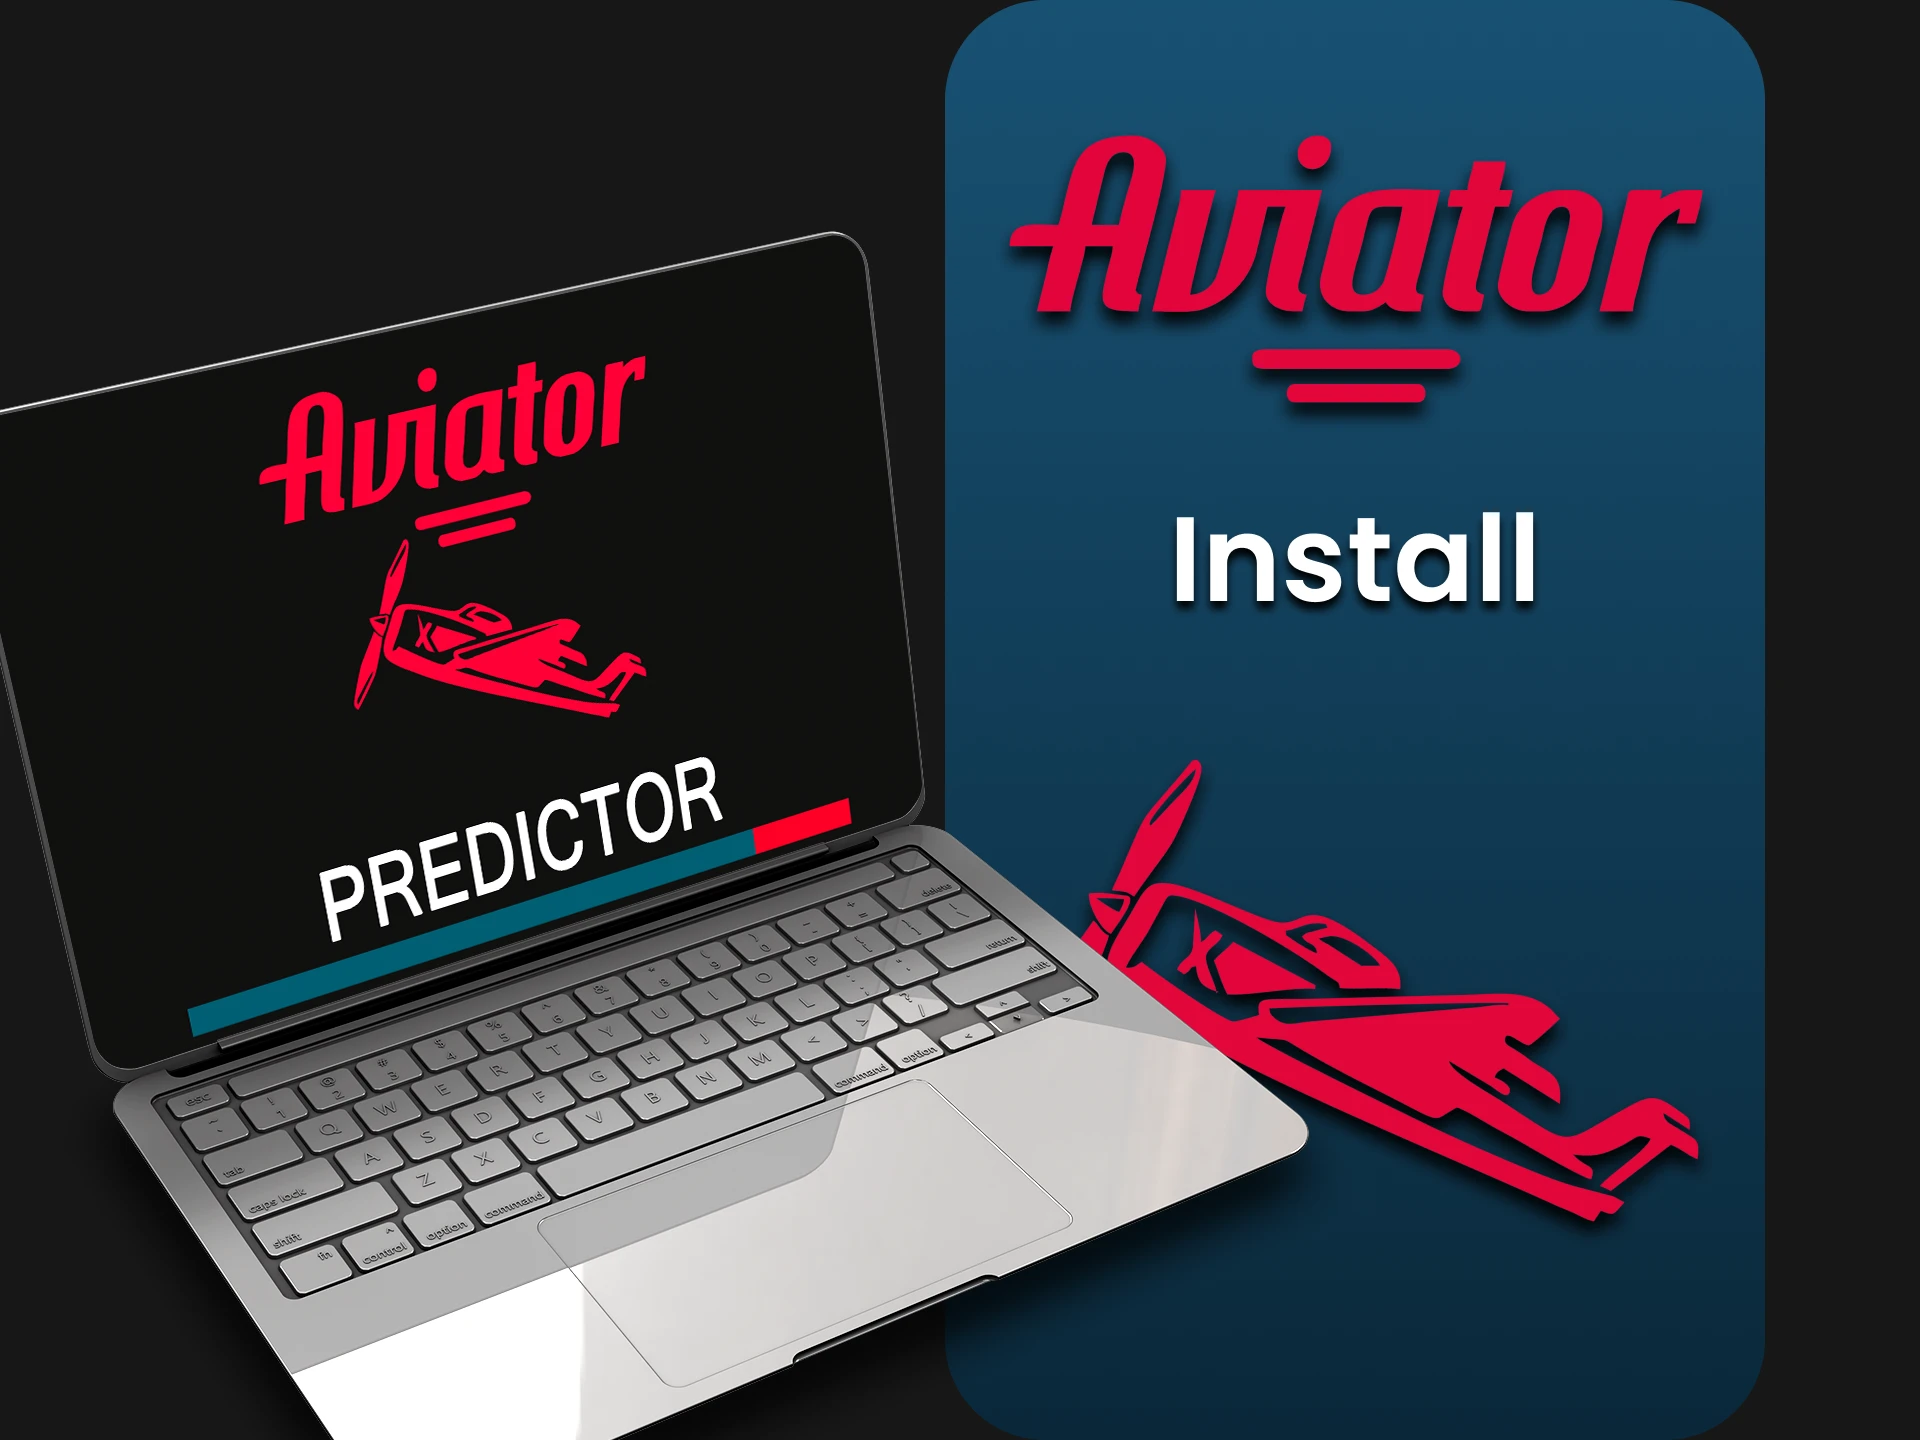 Learn everything about the installation process of Predictor for Aviator.